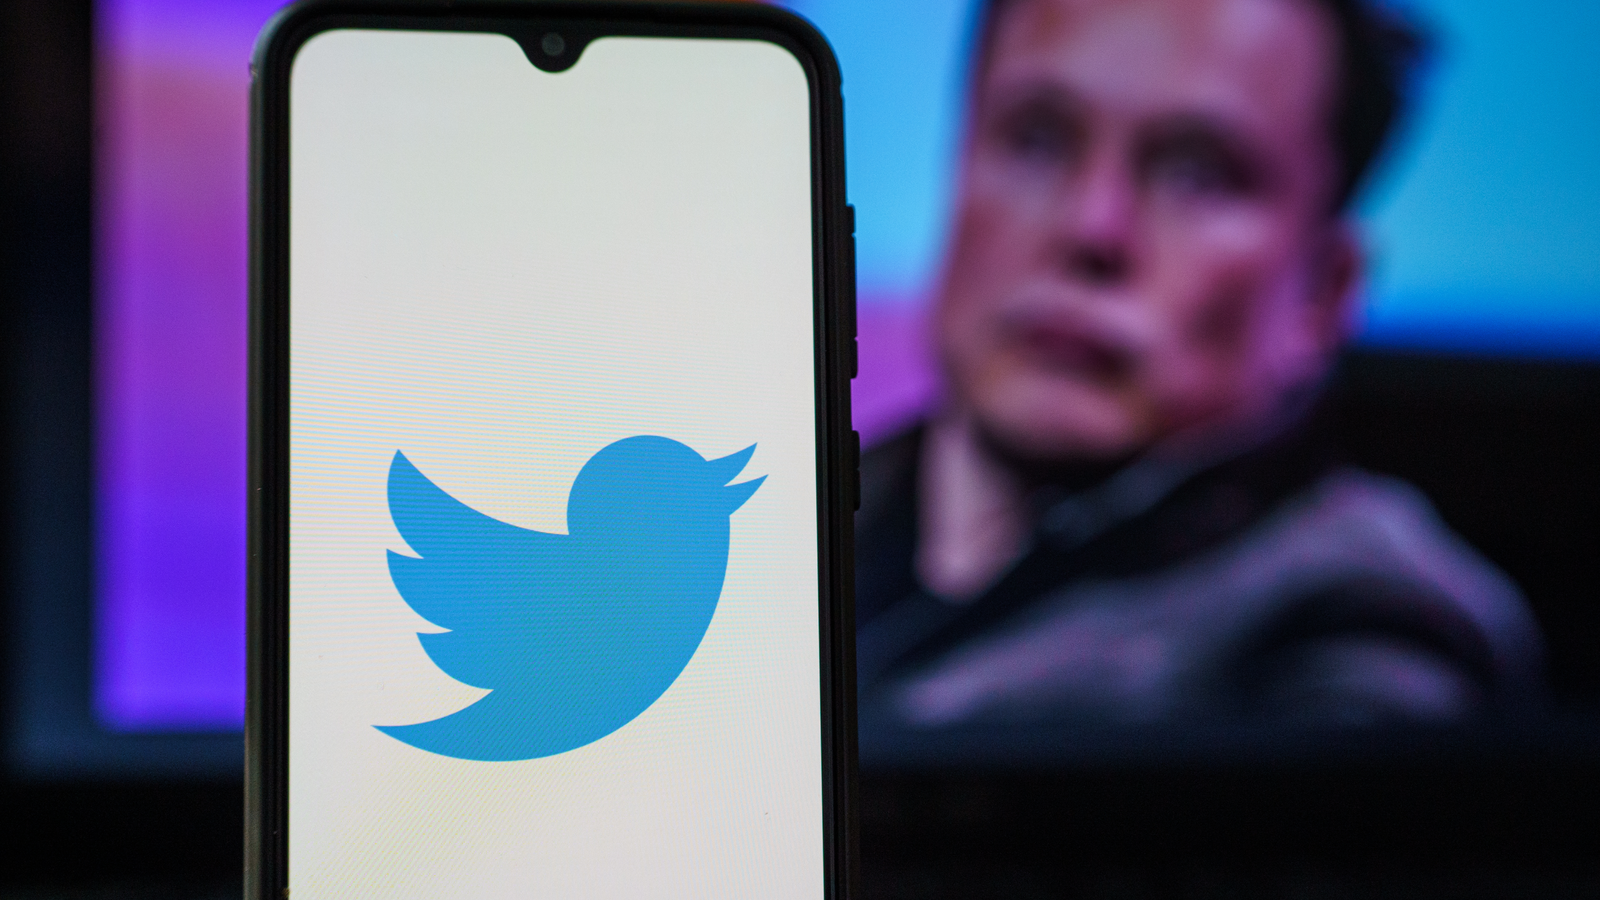 Twitter (TWTR Stock) logo on smartphone and Elon Musk in the background.